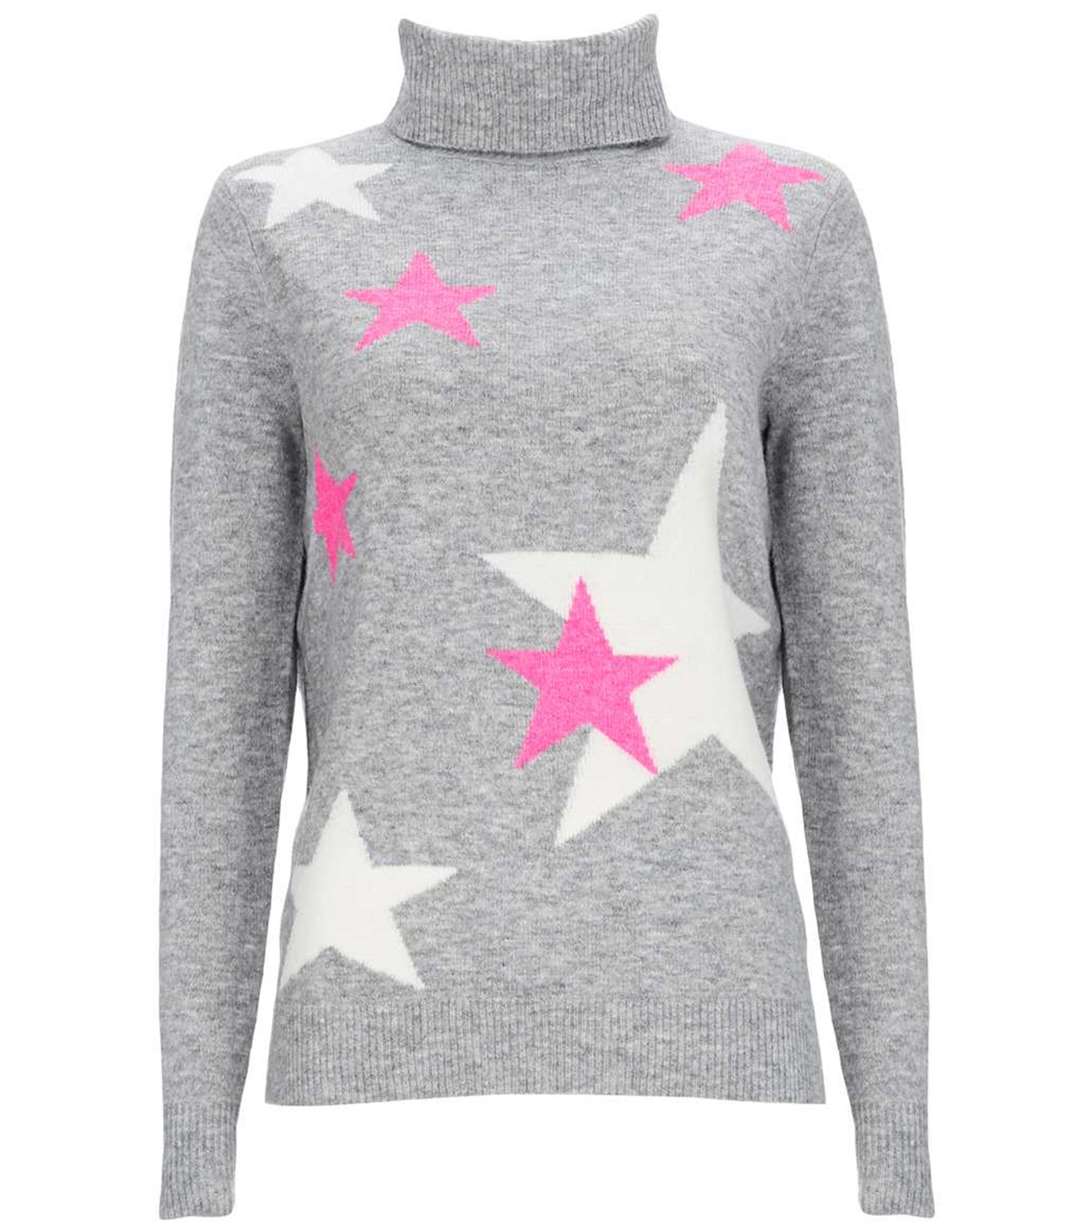 Grey Star Print Jumper, £36, available from Wallis